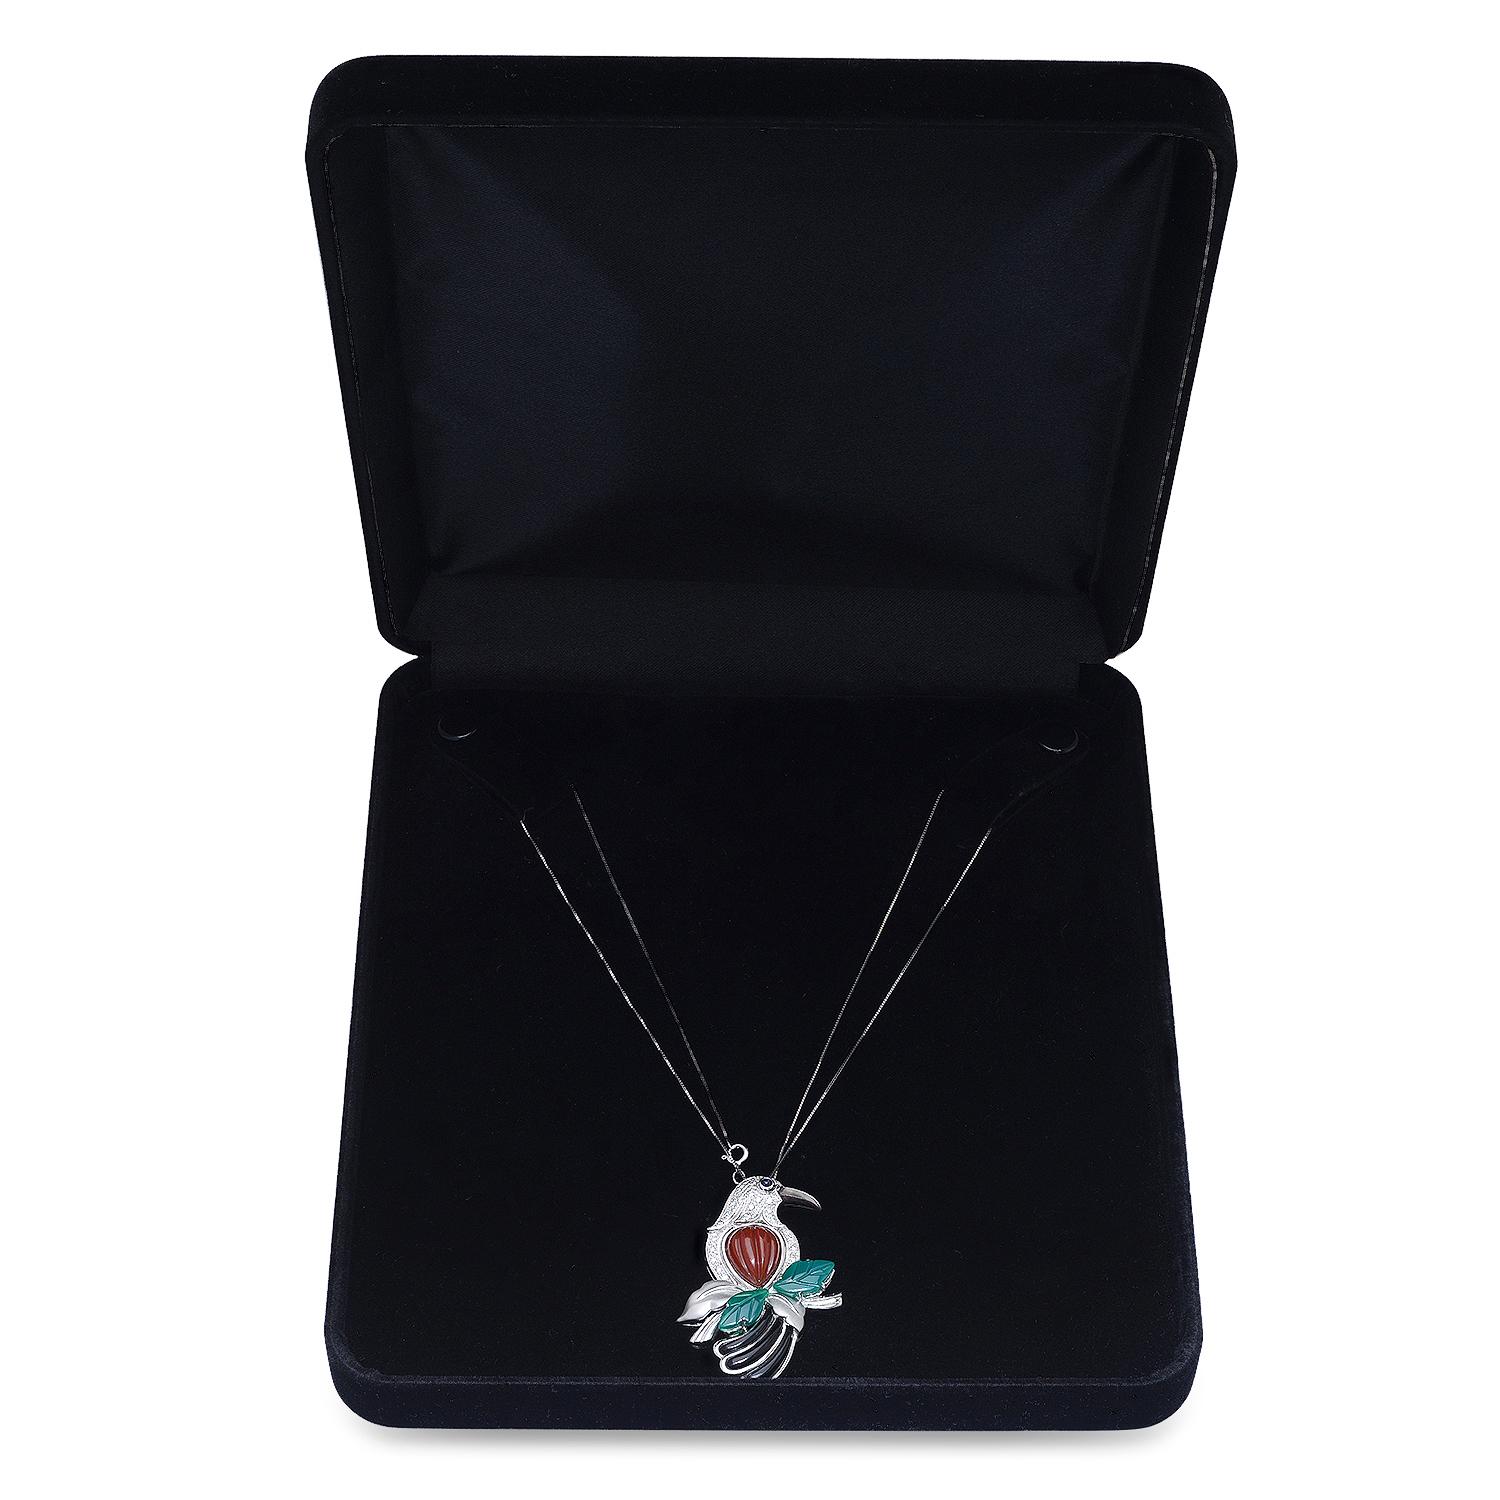 18K White Gold Setting with 0.28ct Diamond, 0.07ct Sapphire and Chalcedony Bird" Pendant"